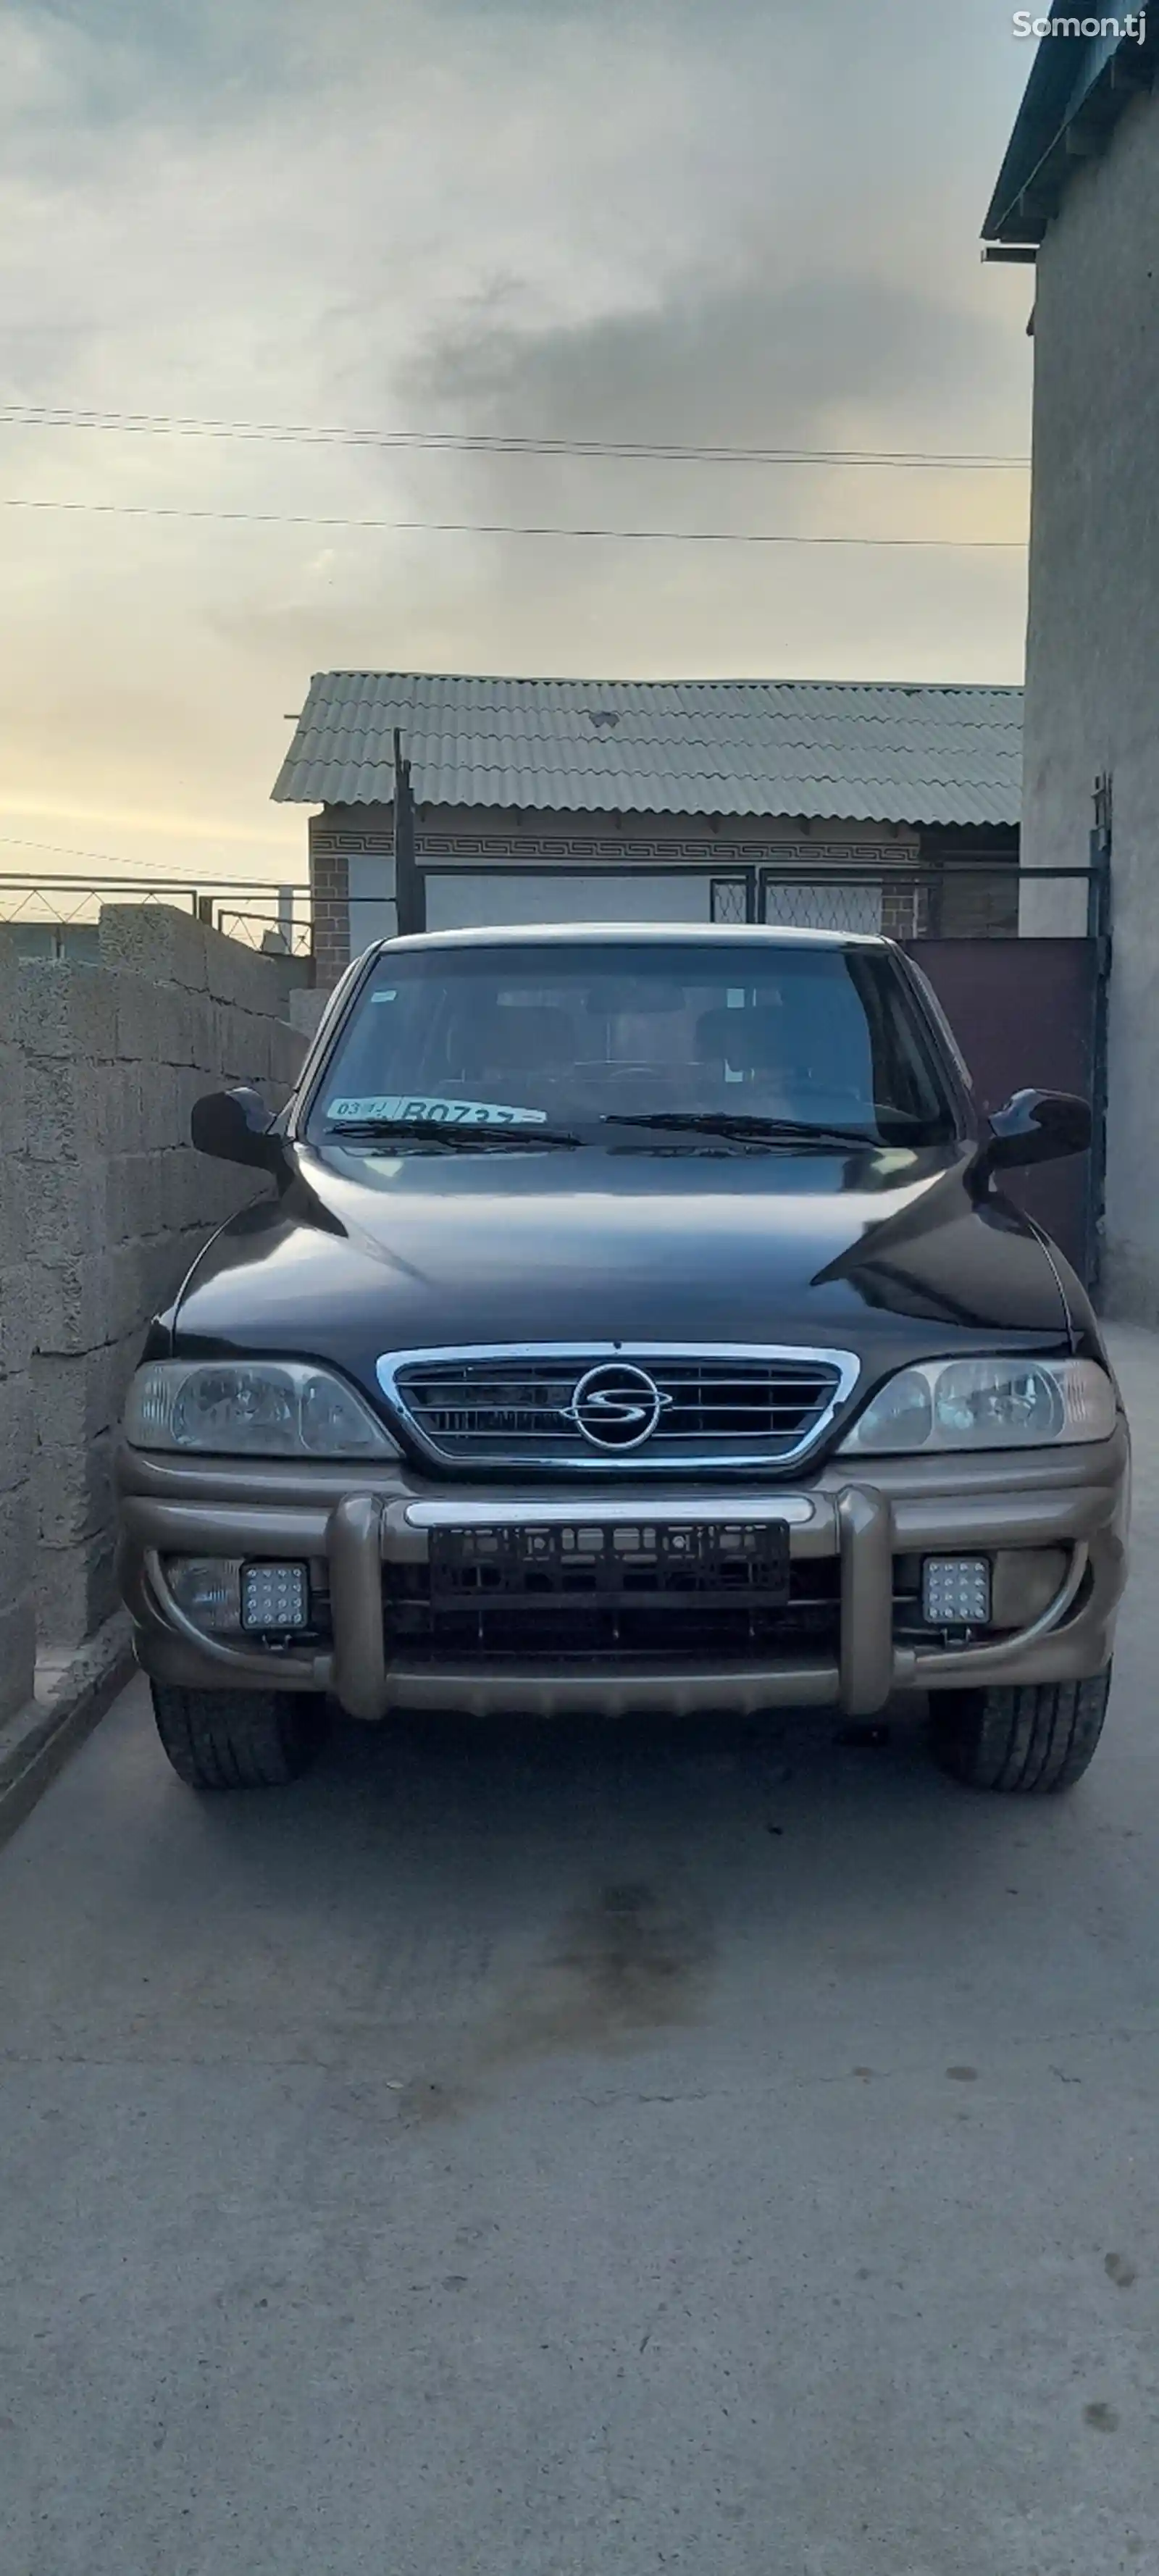 Ssang Yong Musso, 2000-10